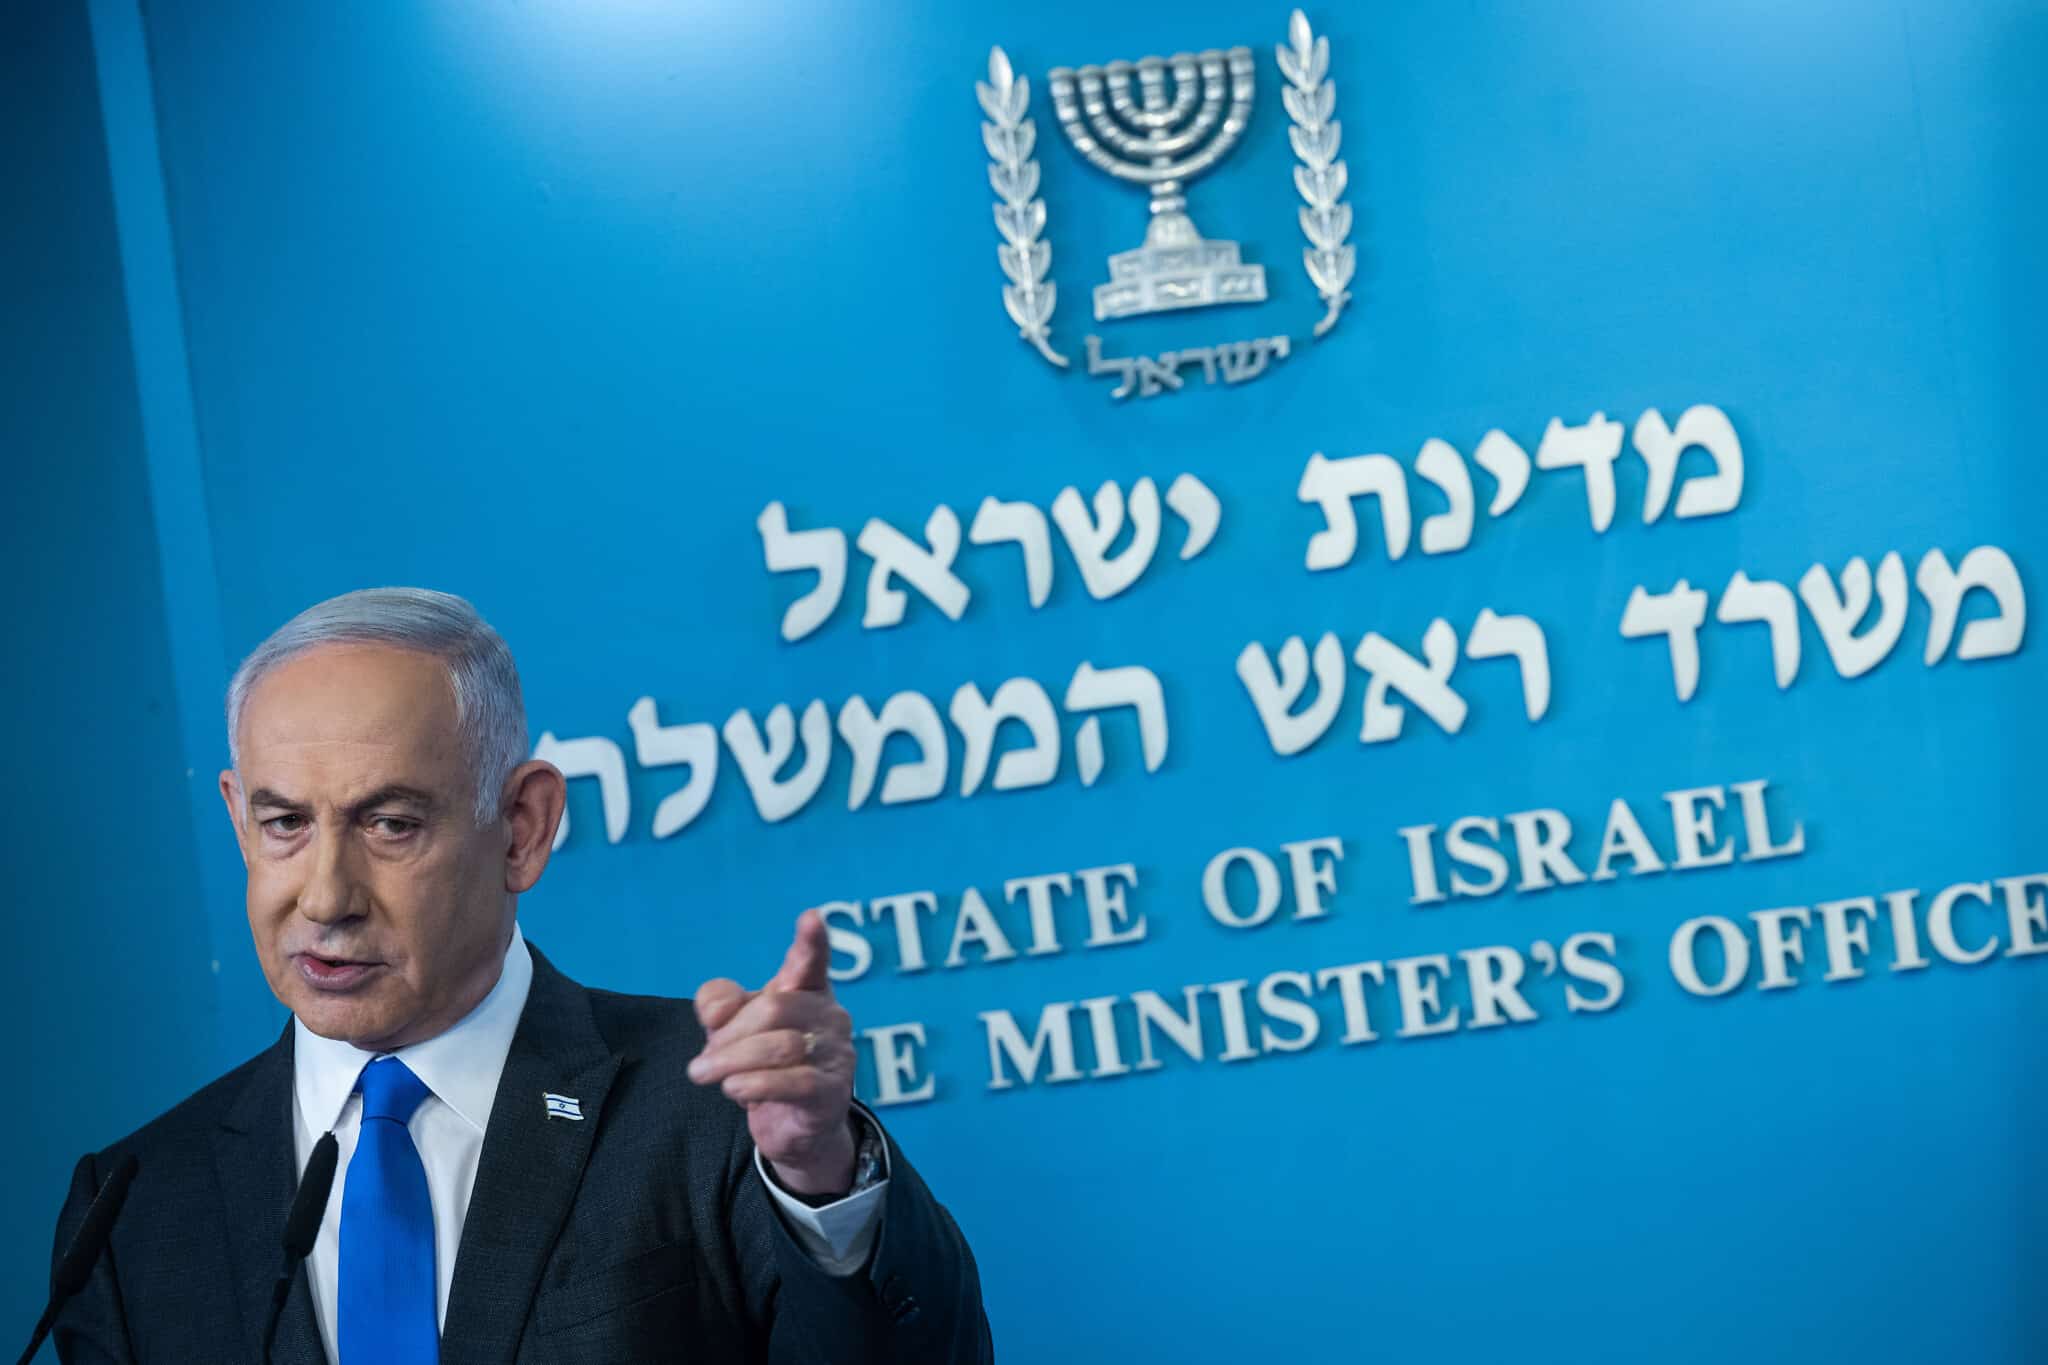 Netanyahu: Israel will not cave to demands Hamas survive